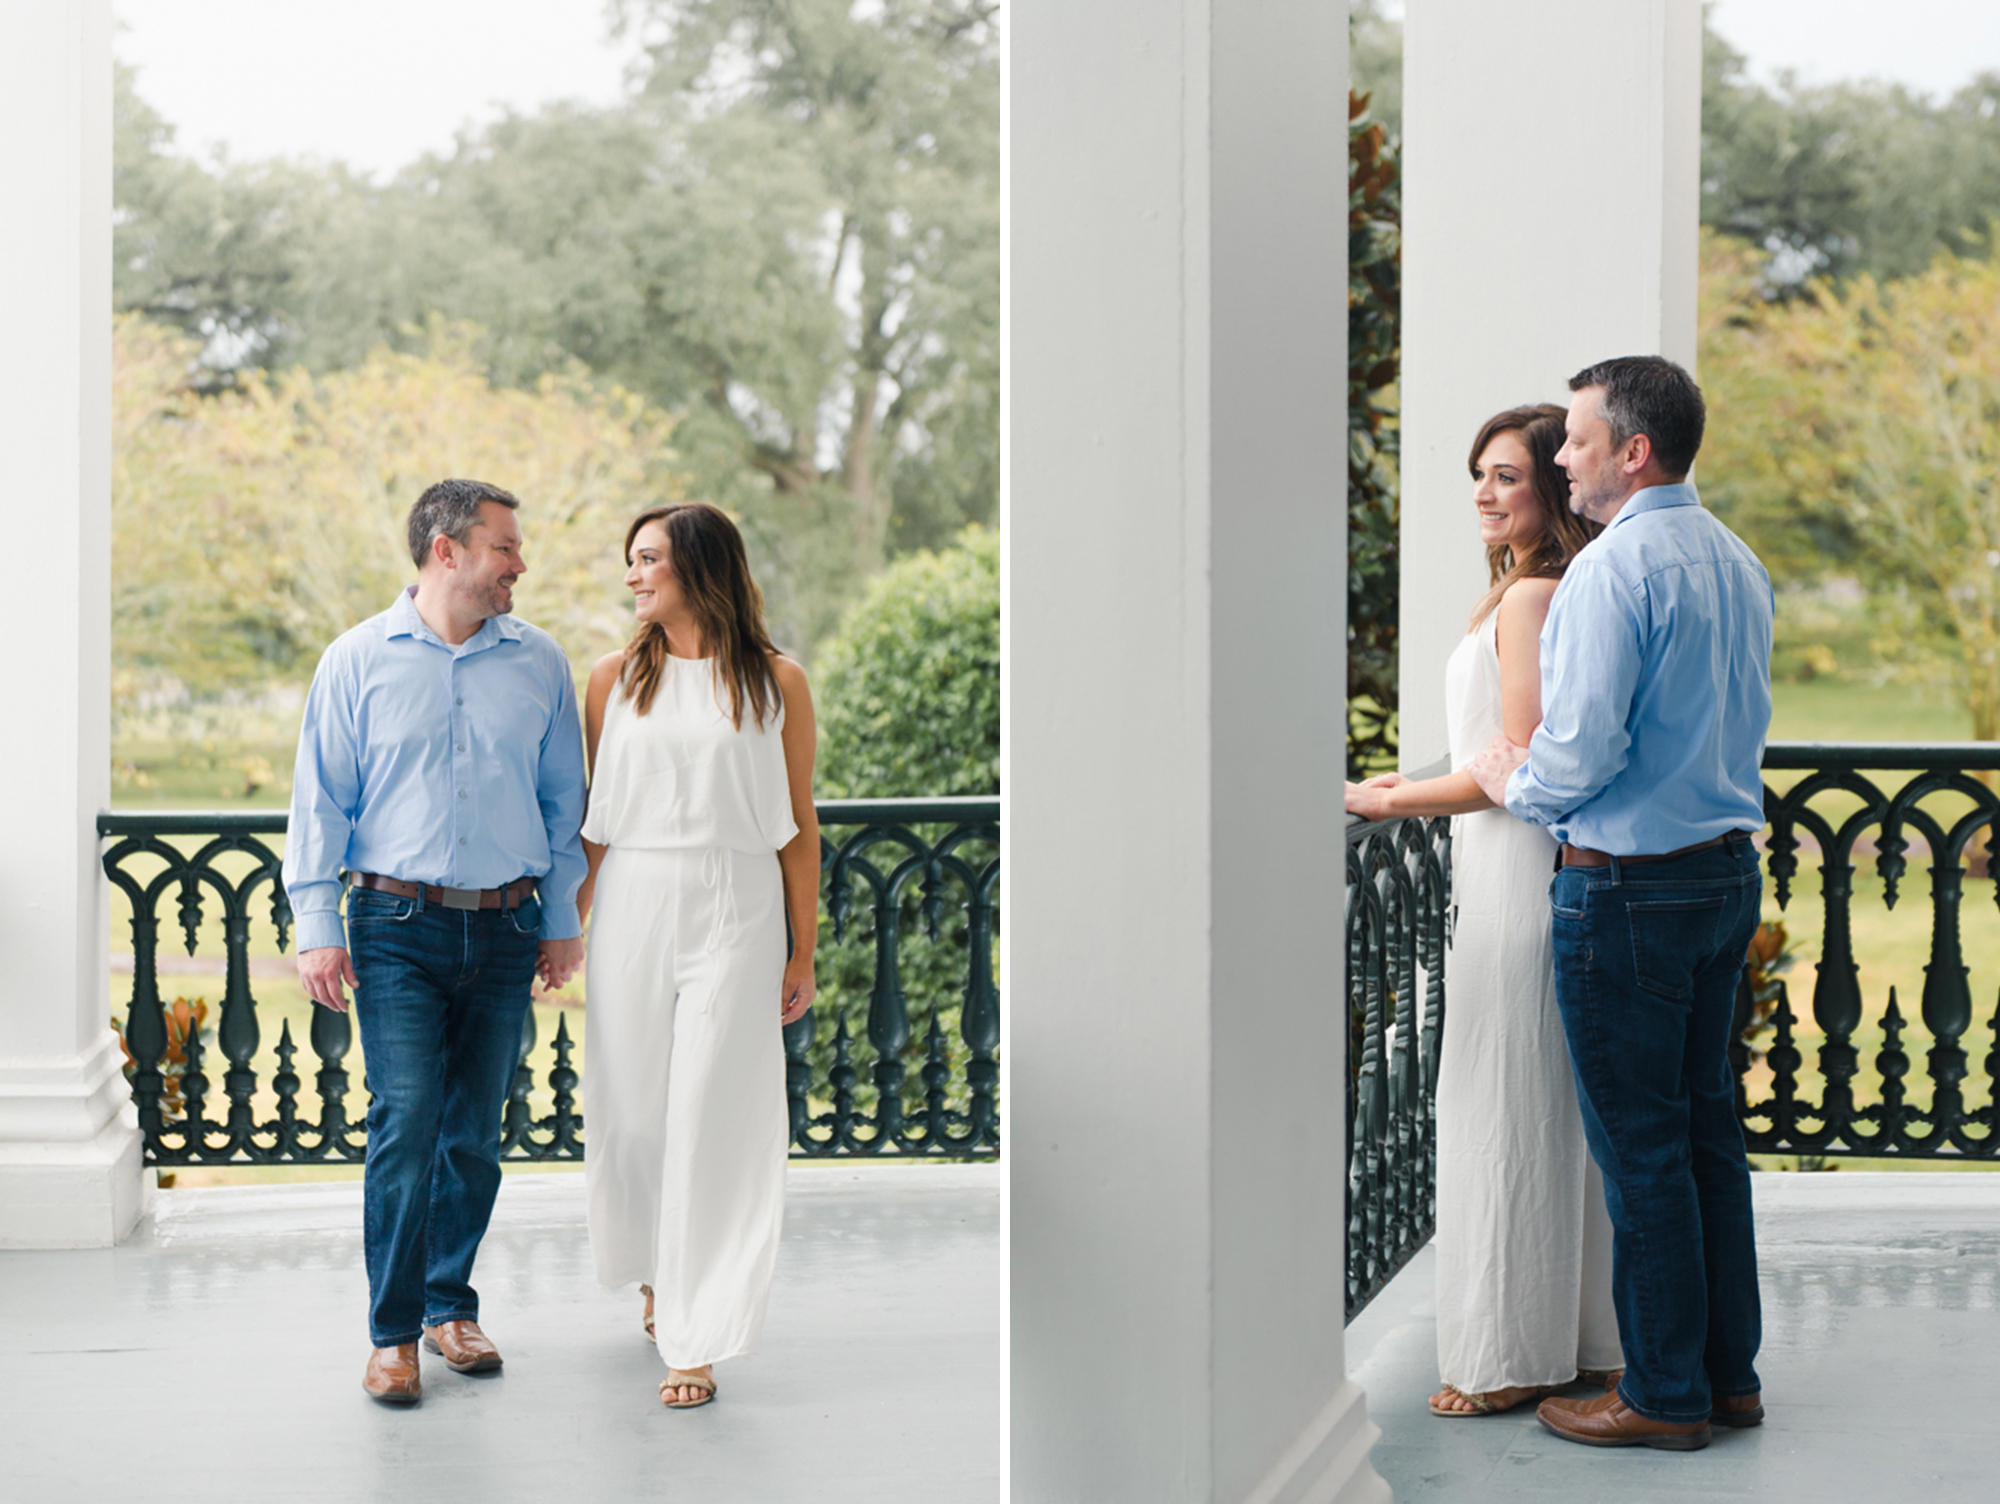 Engaged couple embracing and walking on porch